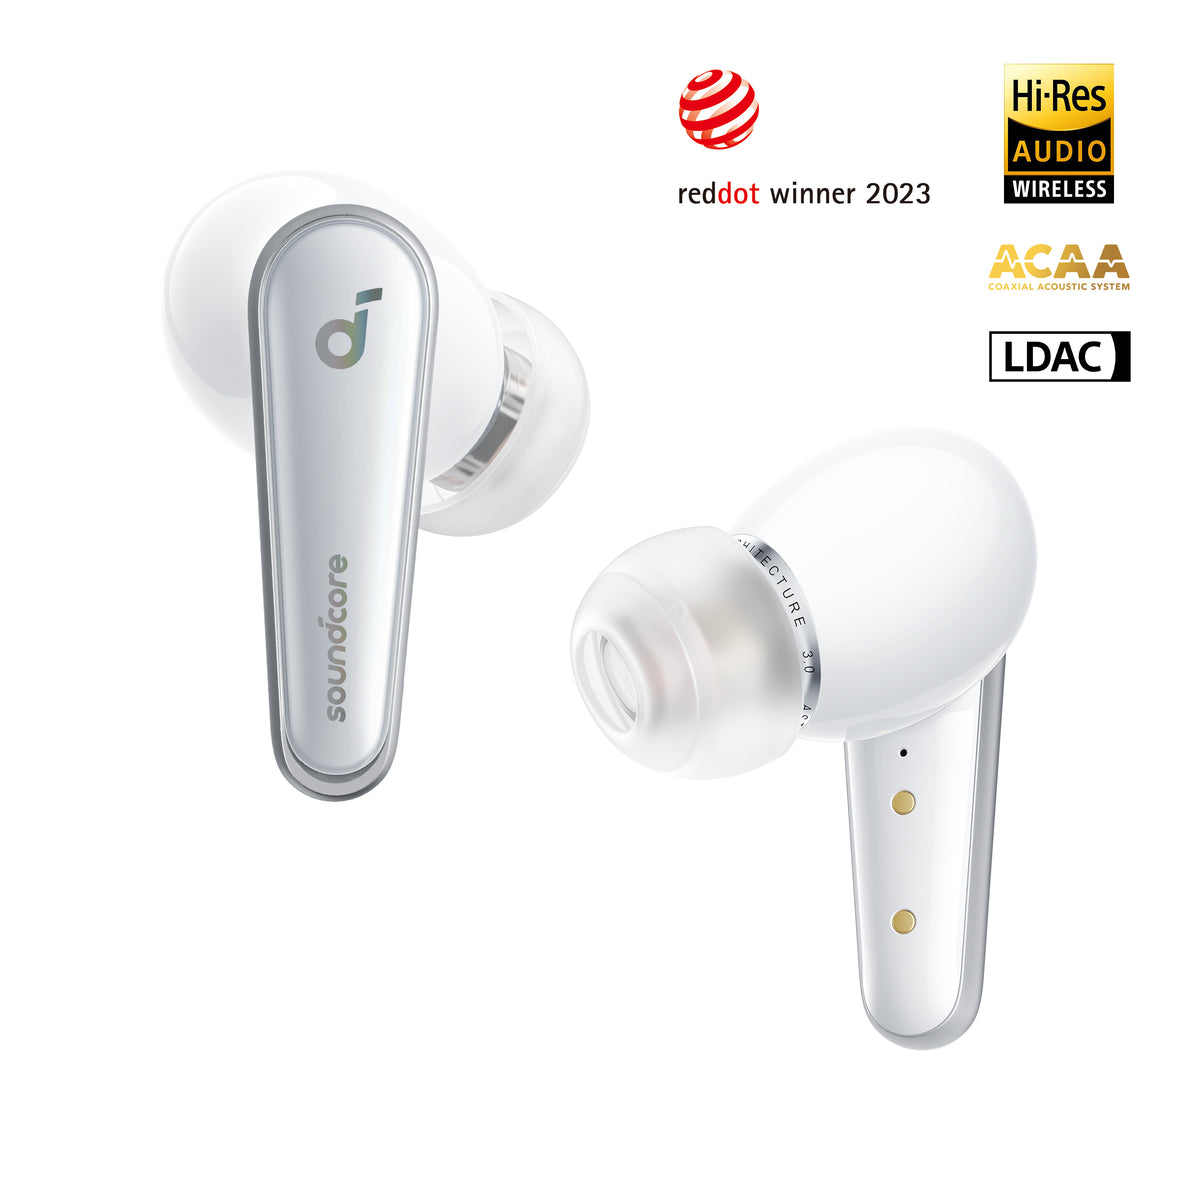 Liberty 4 NC - All-New True-Wireless Noise Canceling Earbuds